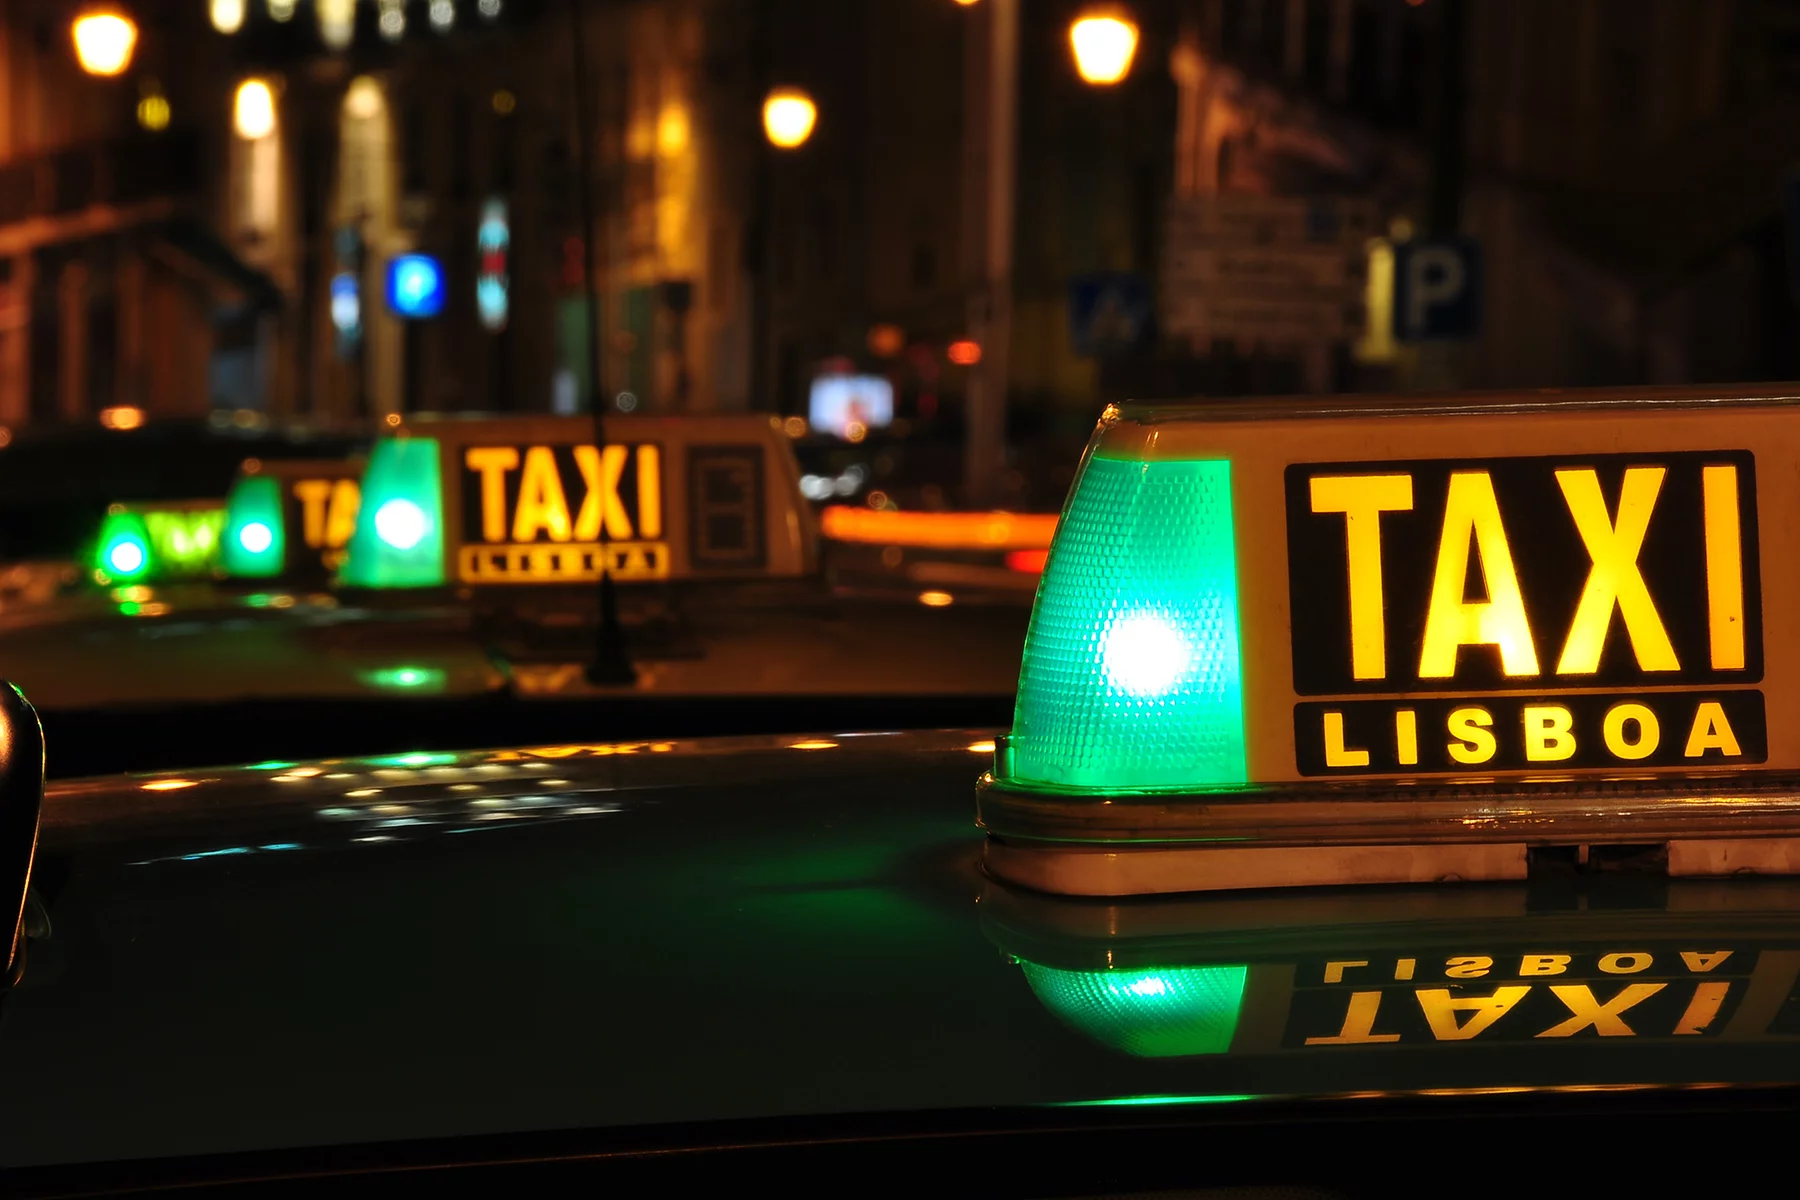 A Lisbon taxi stand at night